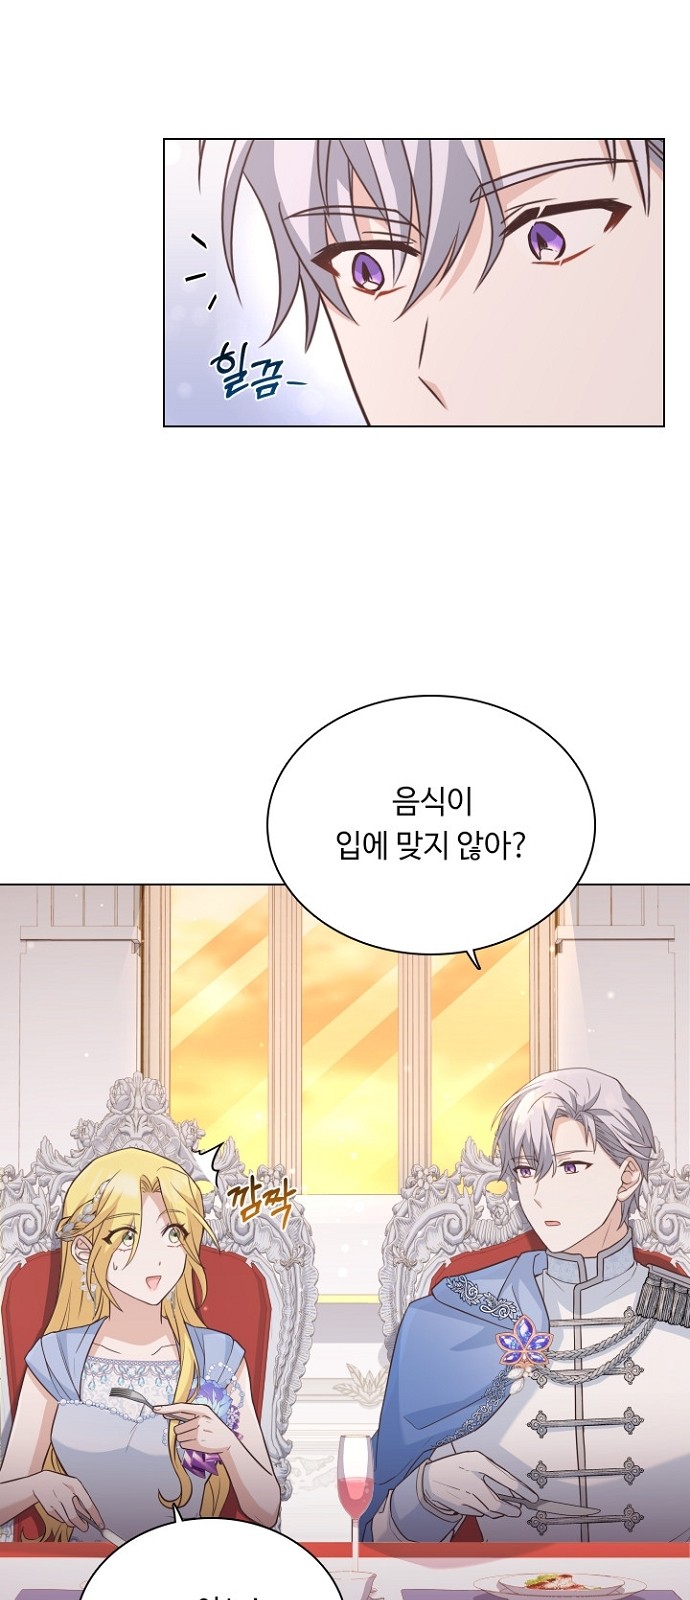 His Majesty's Proposal (A Night With the Emperor) - Chapter 39 - Page 3